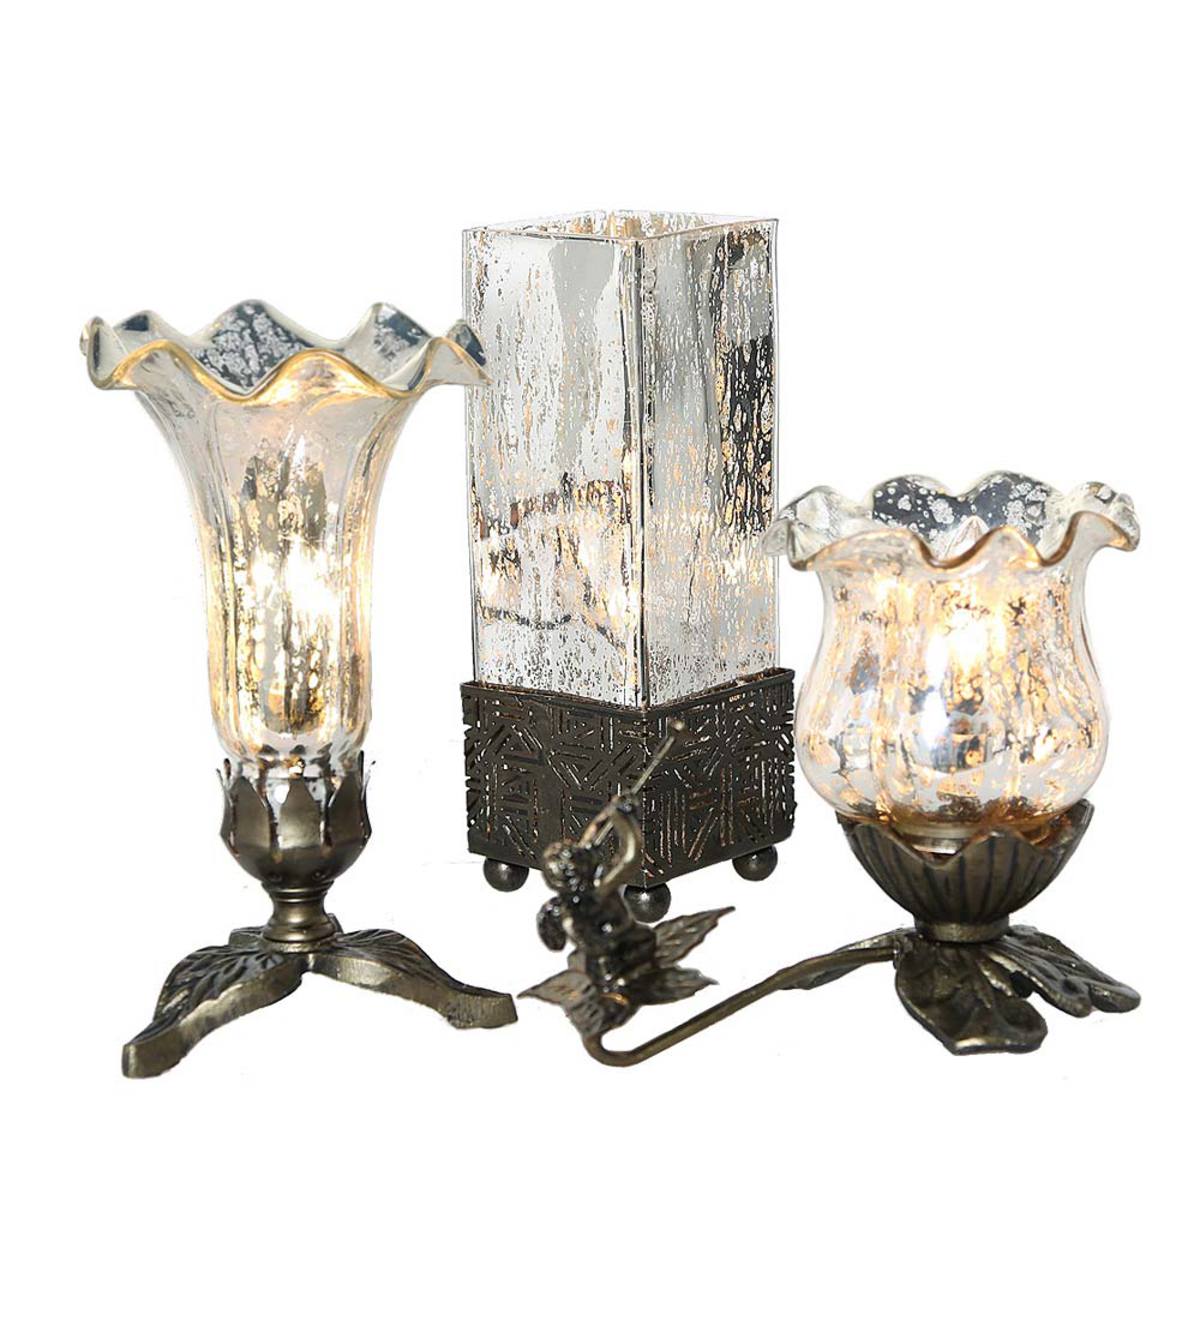 Mercury Glass Accent Lamps, Set of 3 - Silver